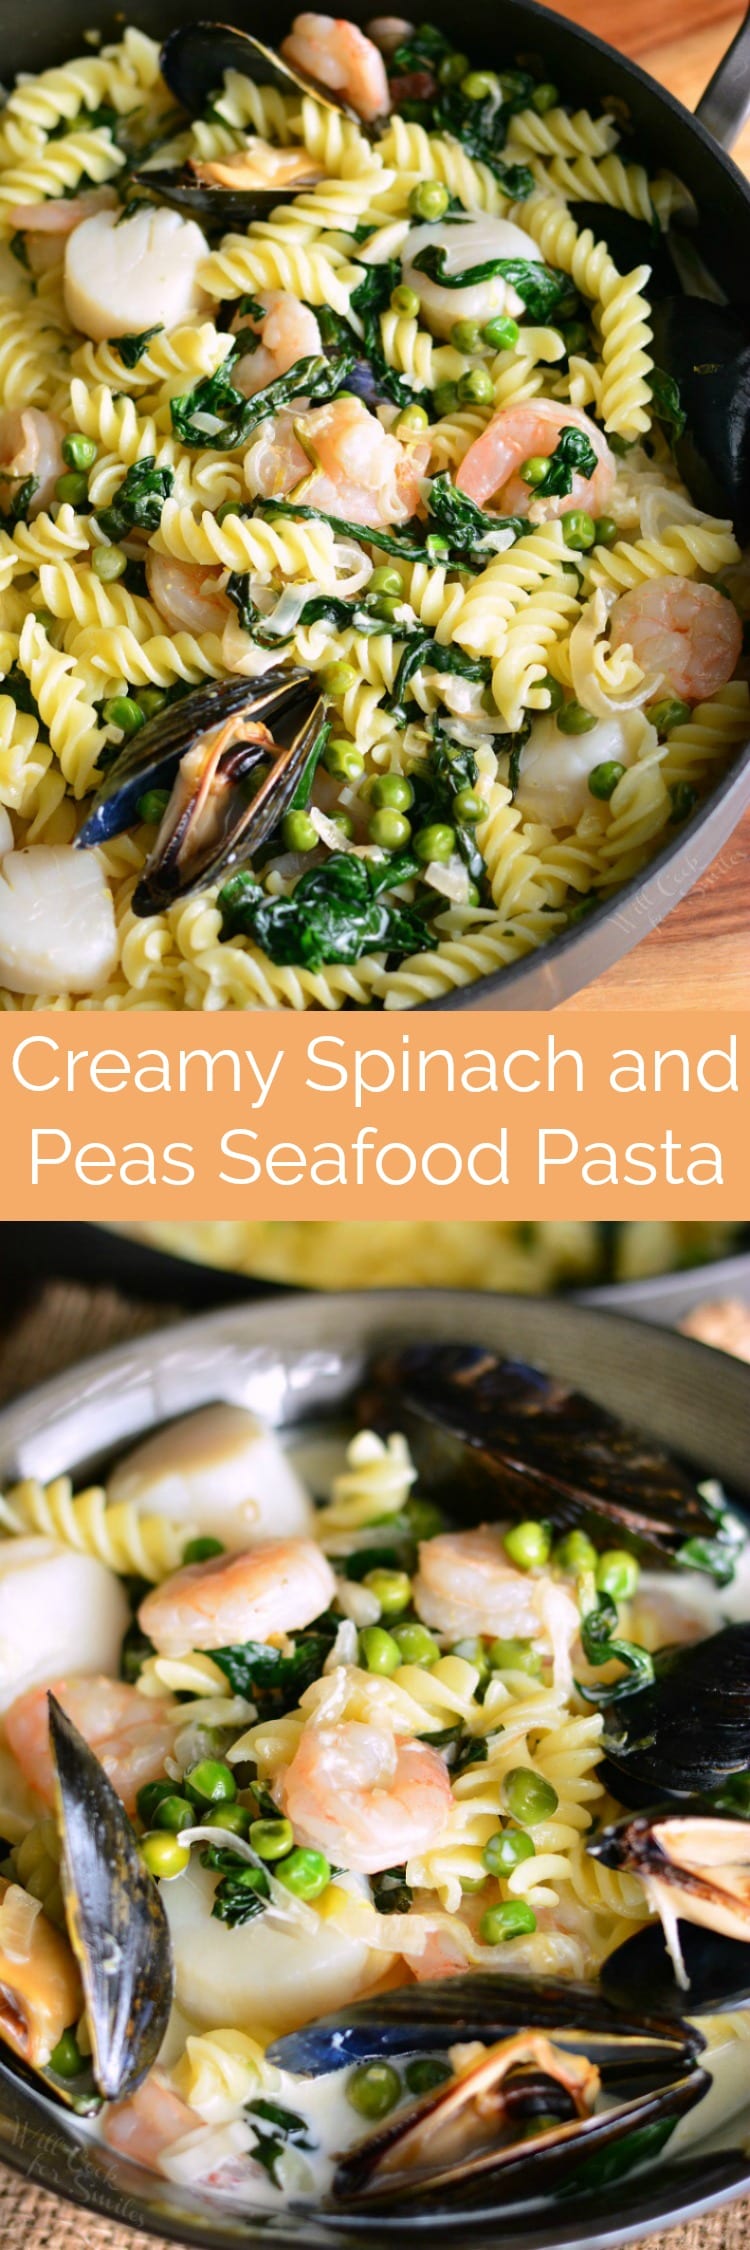 Creamy Spinach and Peas Seafood Pasta in a pan collage